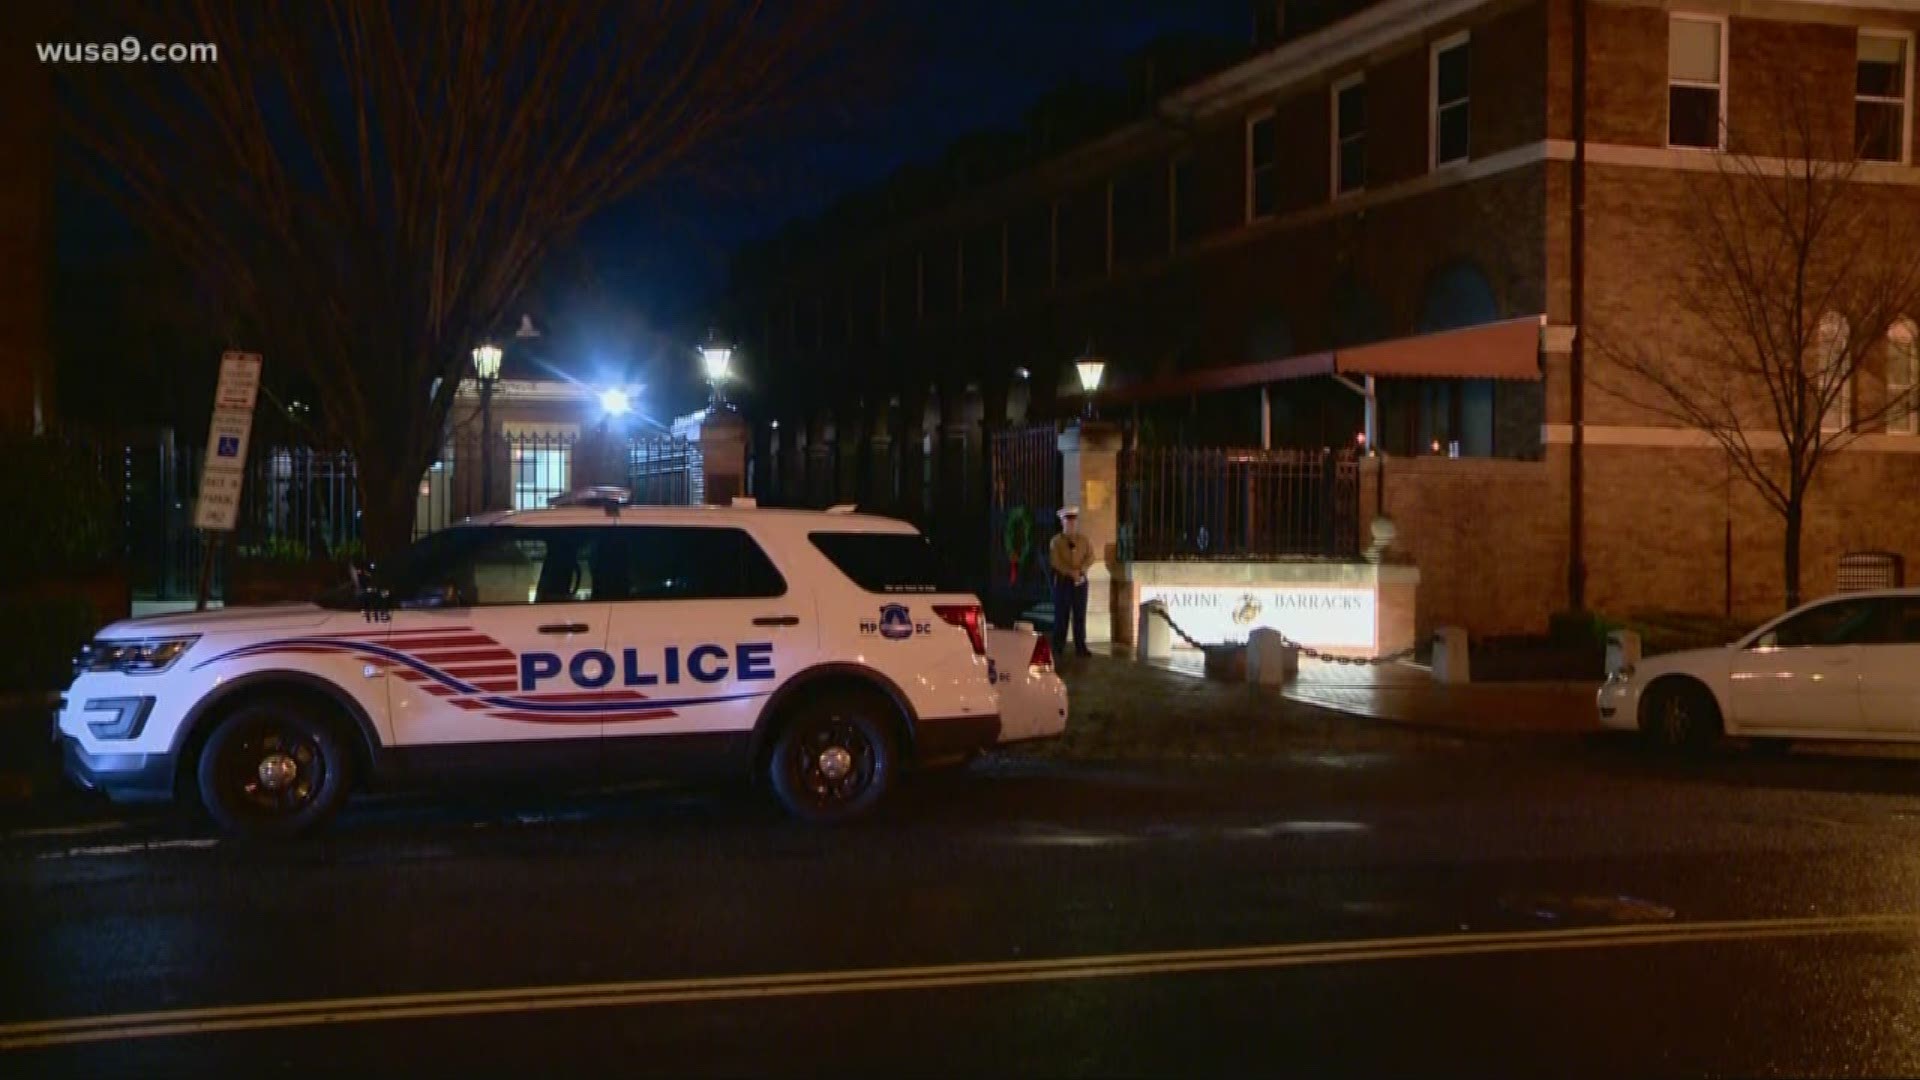 A Marine has died after a shooting the Marine barracks in SE DC.